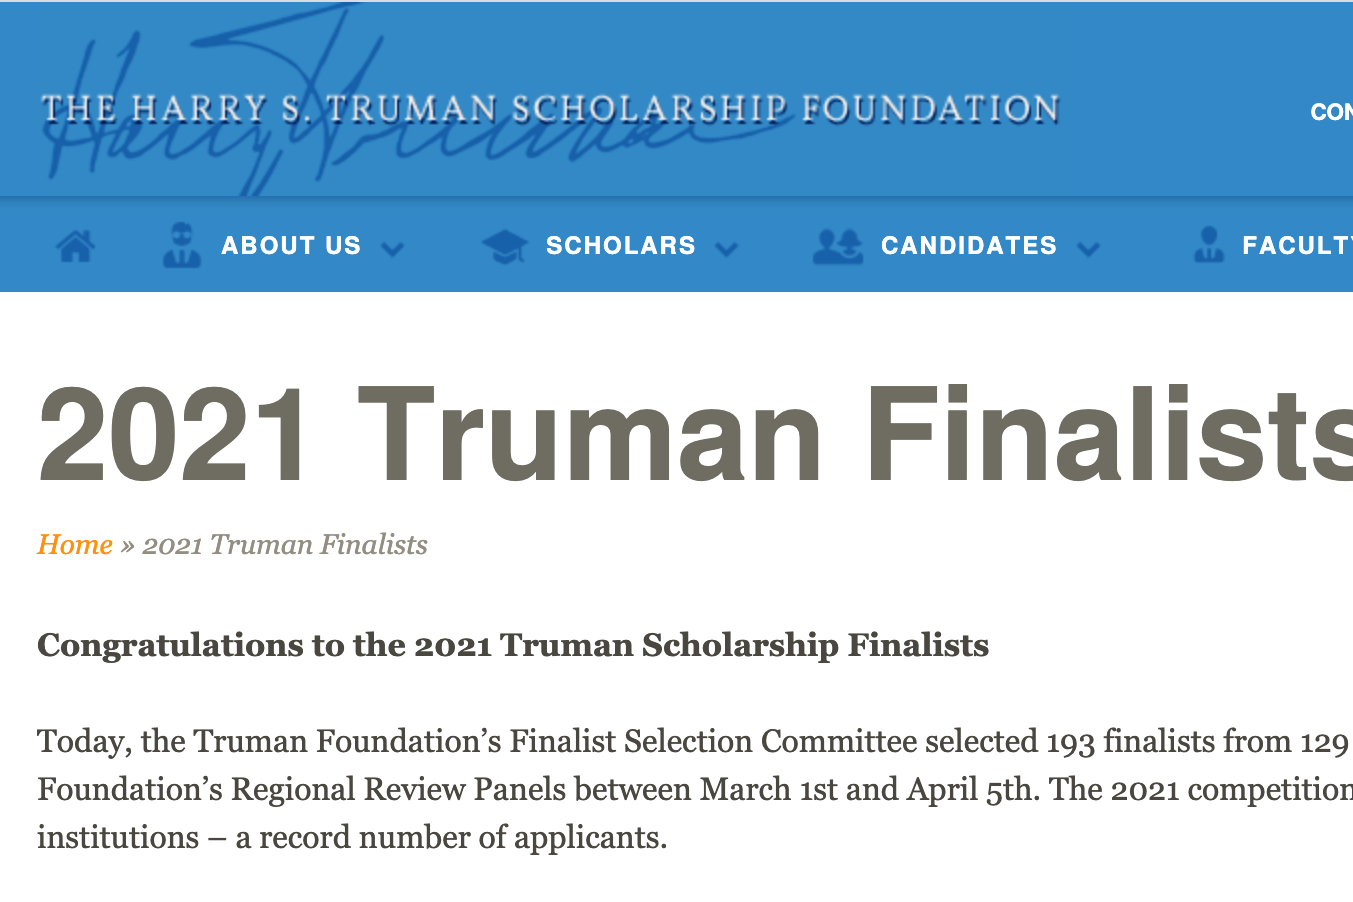 Aggies Nominated for Truman Scholarship